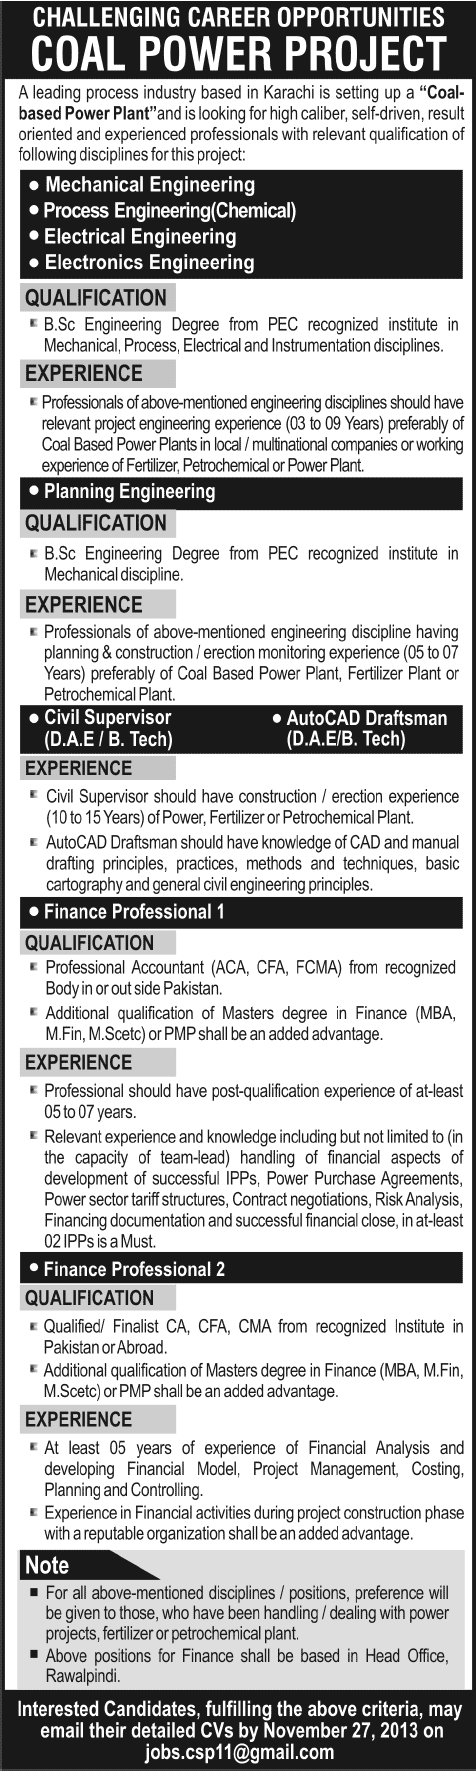 Coal Power Project Jobs in Pakistan 2013 November for Engineers & Finance Professionals